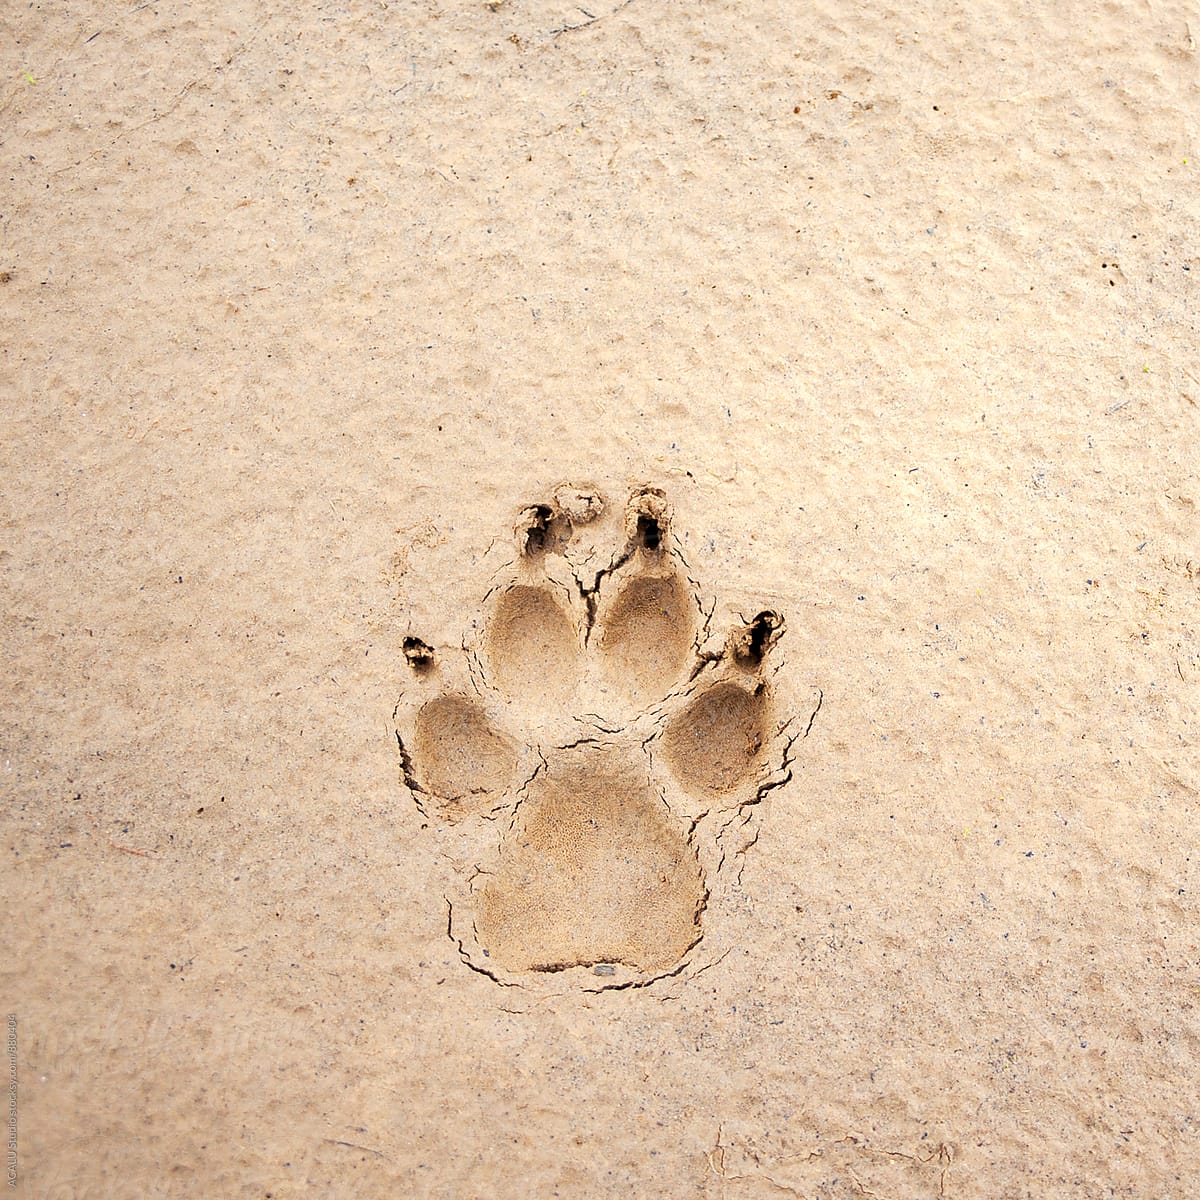 Dog footprints in the sand